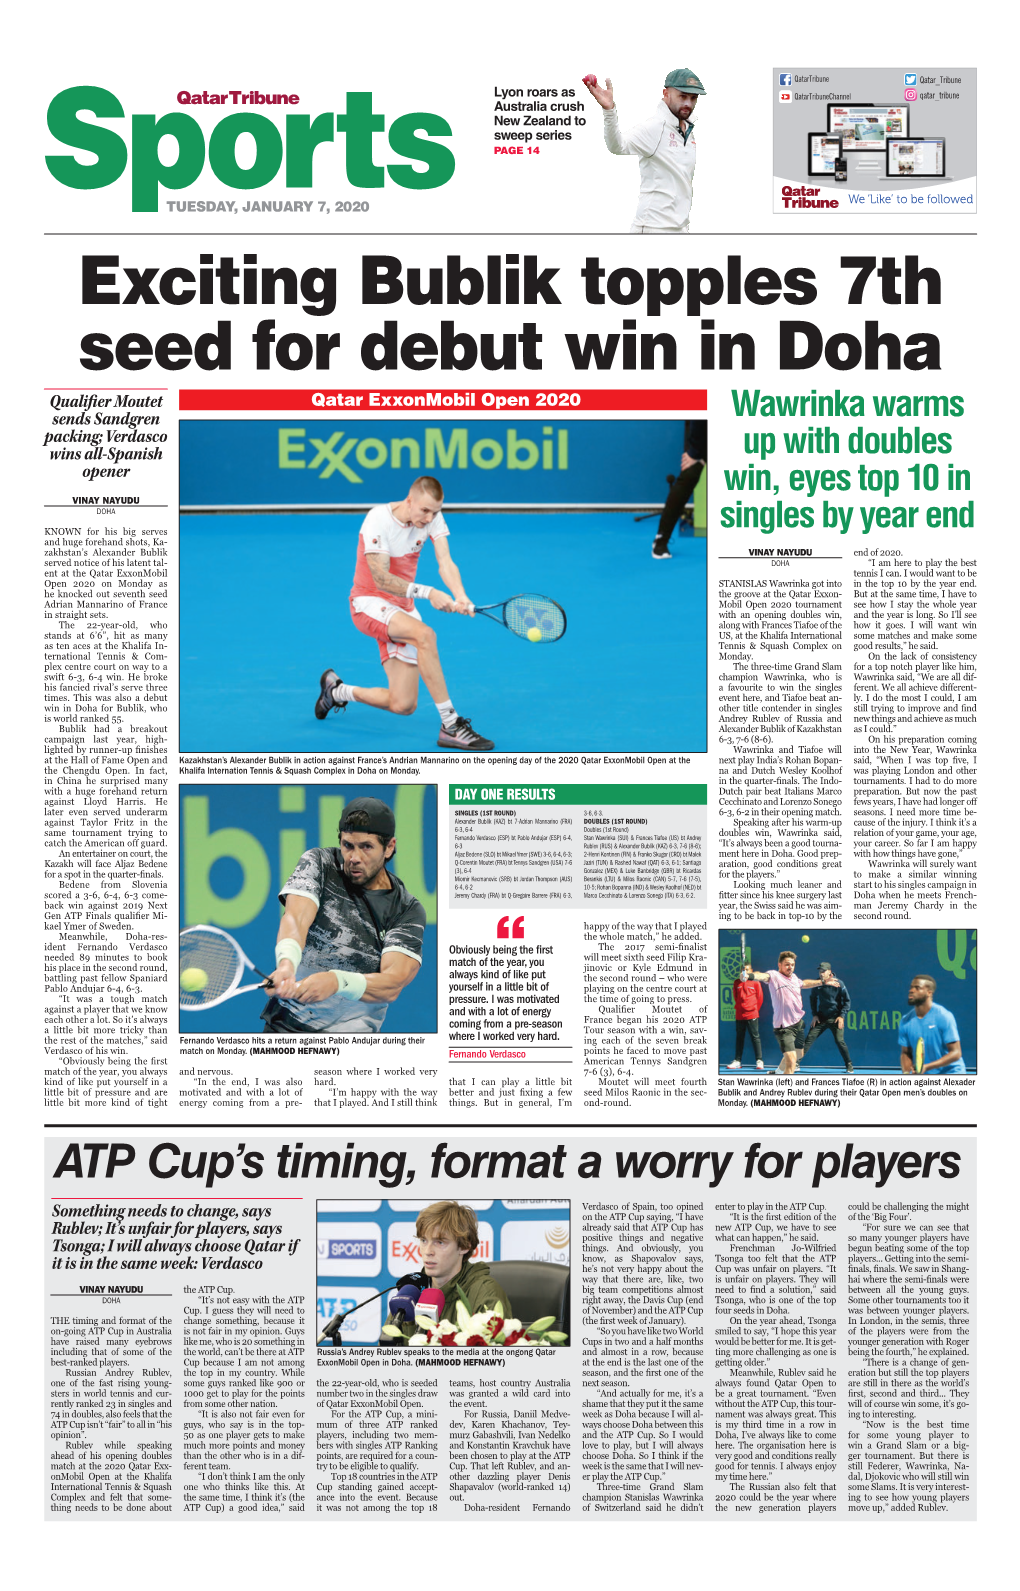 Verdasco Wins All-Spanish up with Doubles Opener Win, Eyes Top 10 in Vinay Nayudu Doha